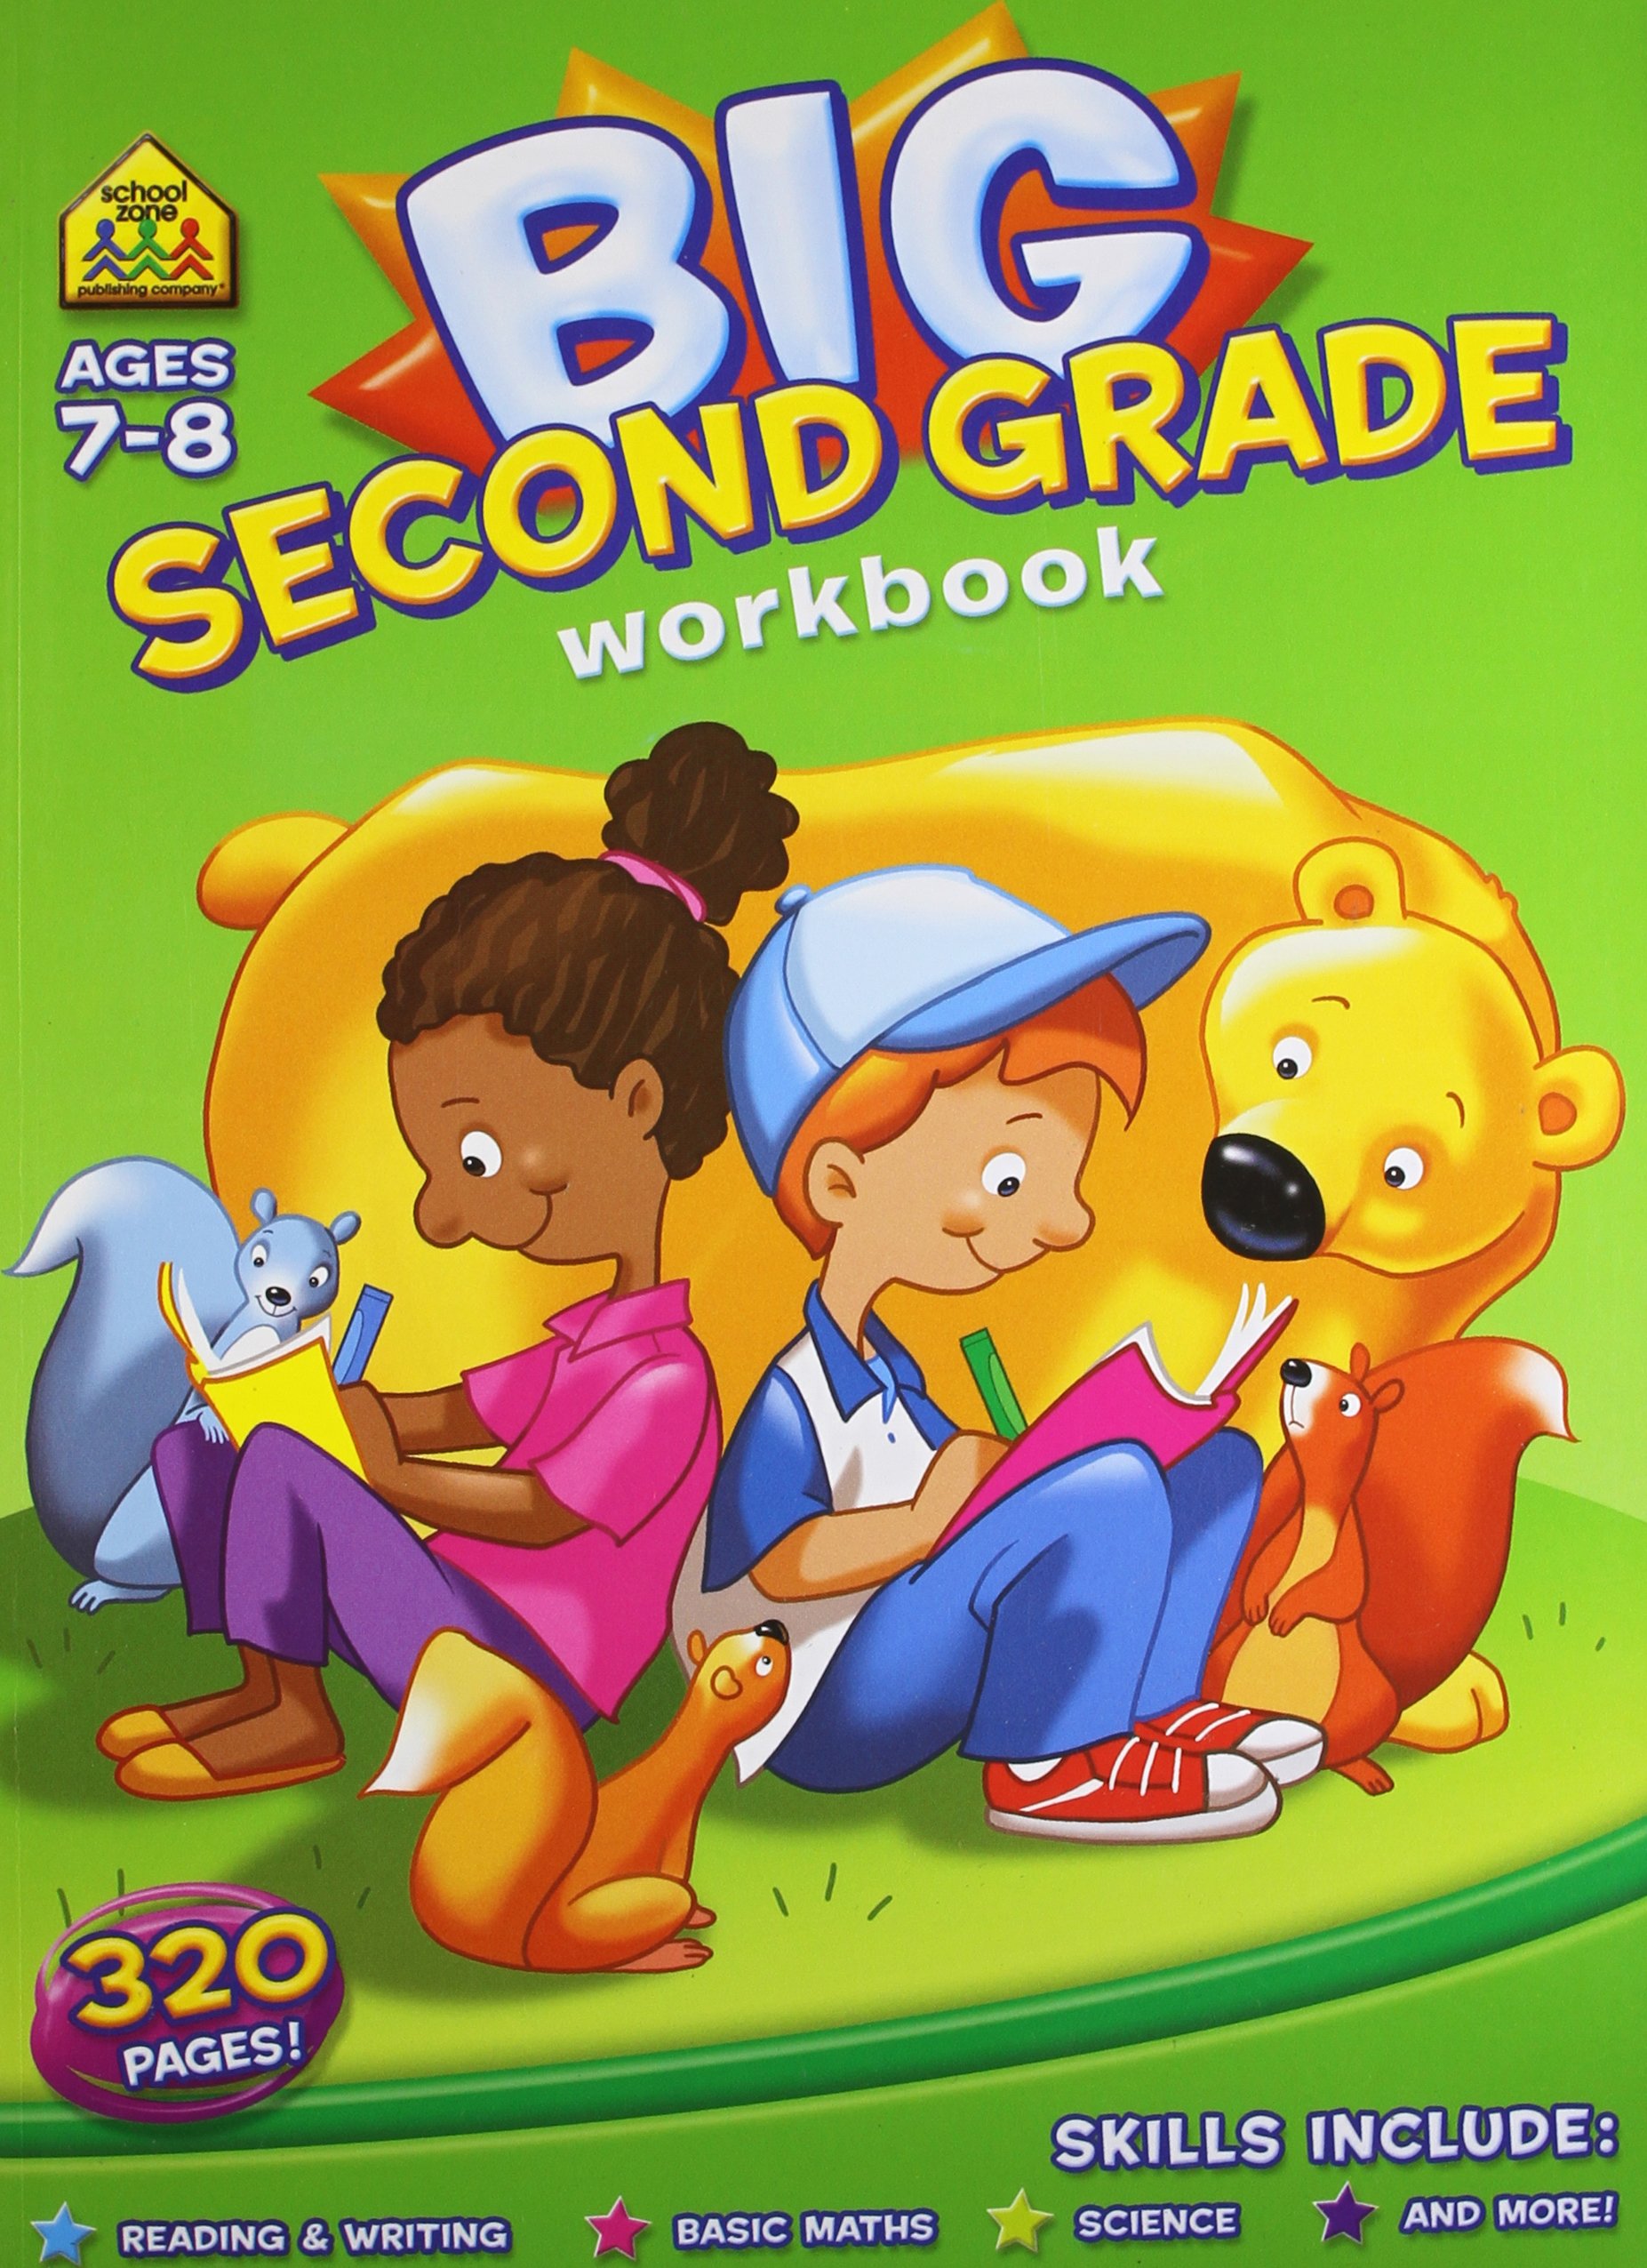 BIG PRESCHOOL WORKBOOK. Ages 3-5, 320 Pages Alphabet and Numbers ...